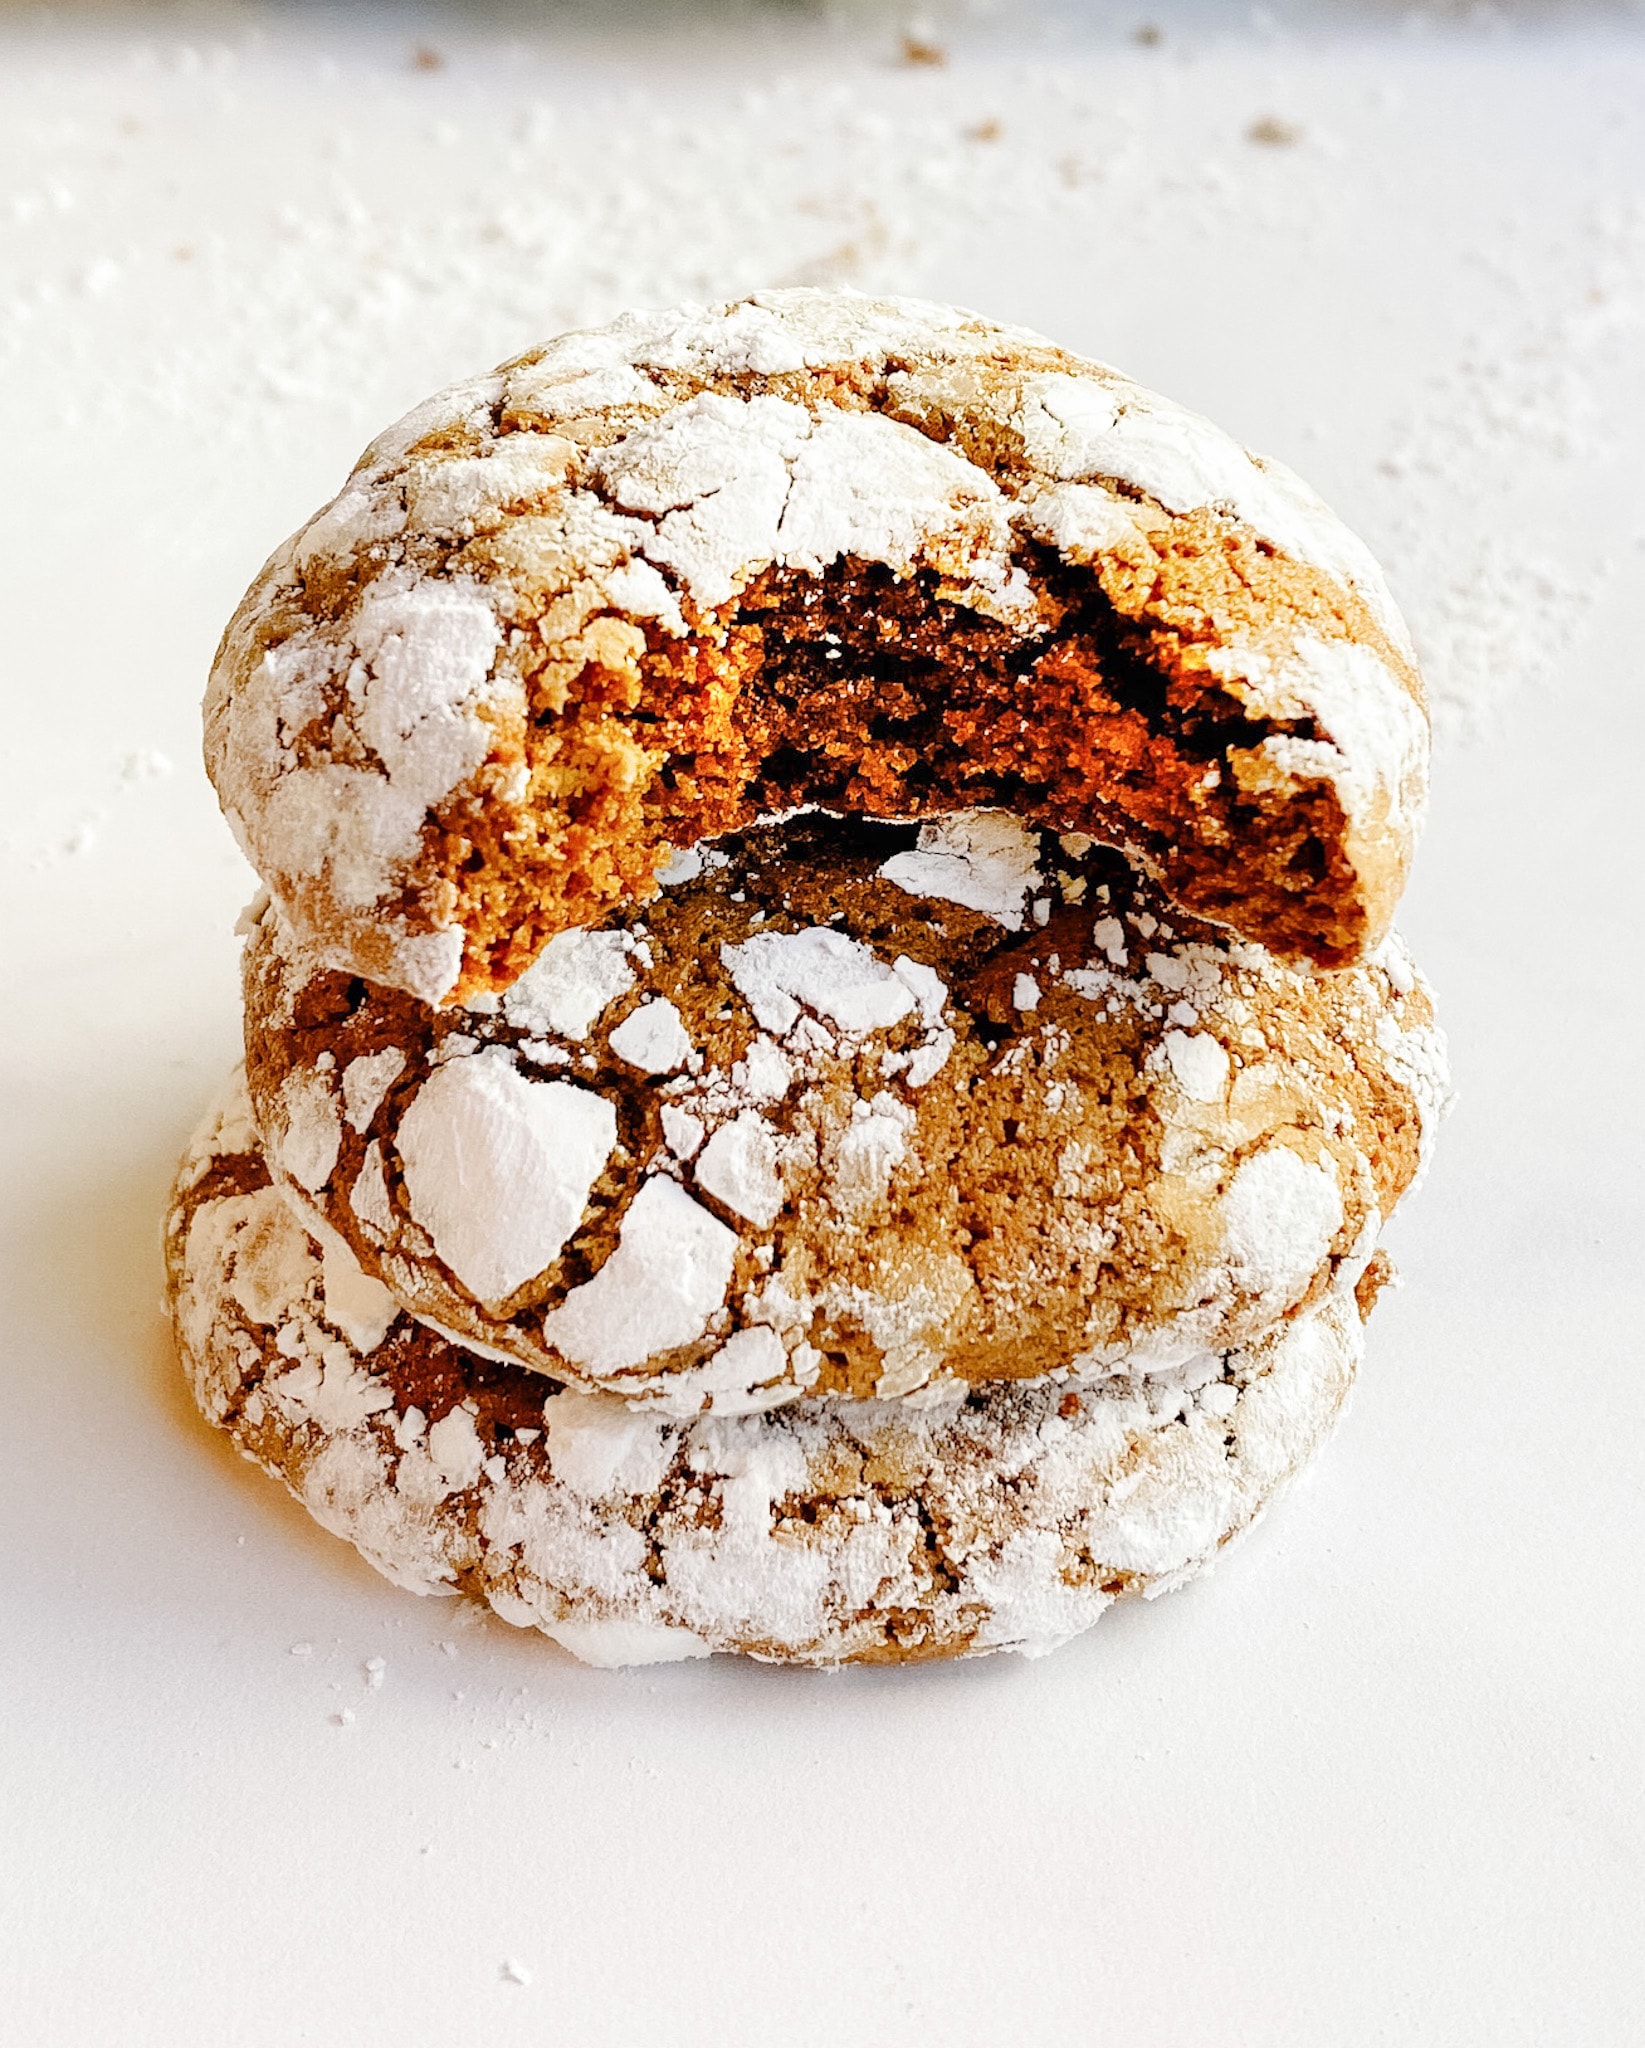 Gingerbread crinkle cookies. A stack of three with the top cookie having a bite out of it